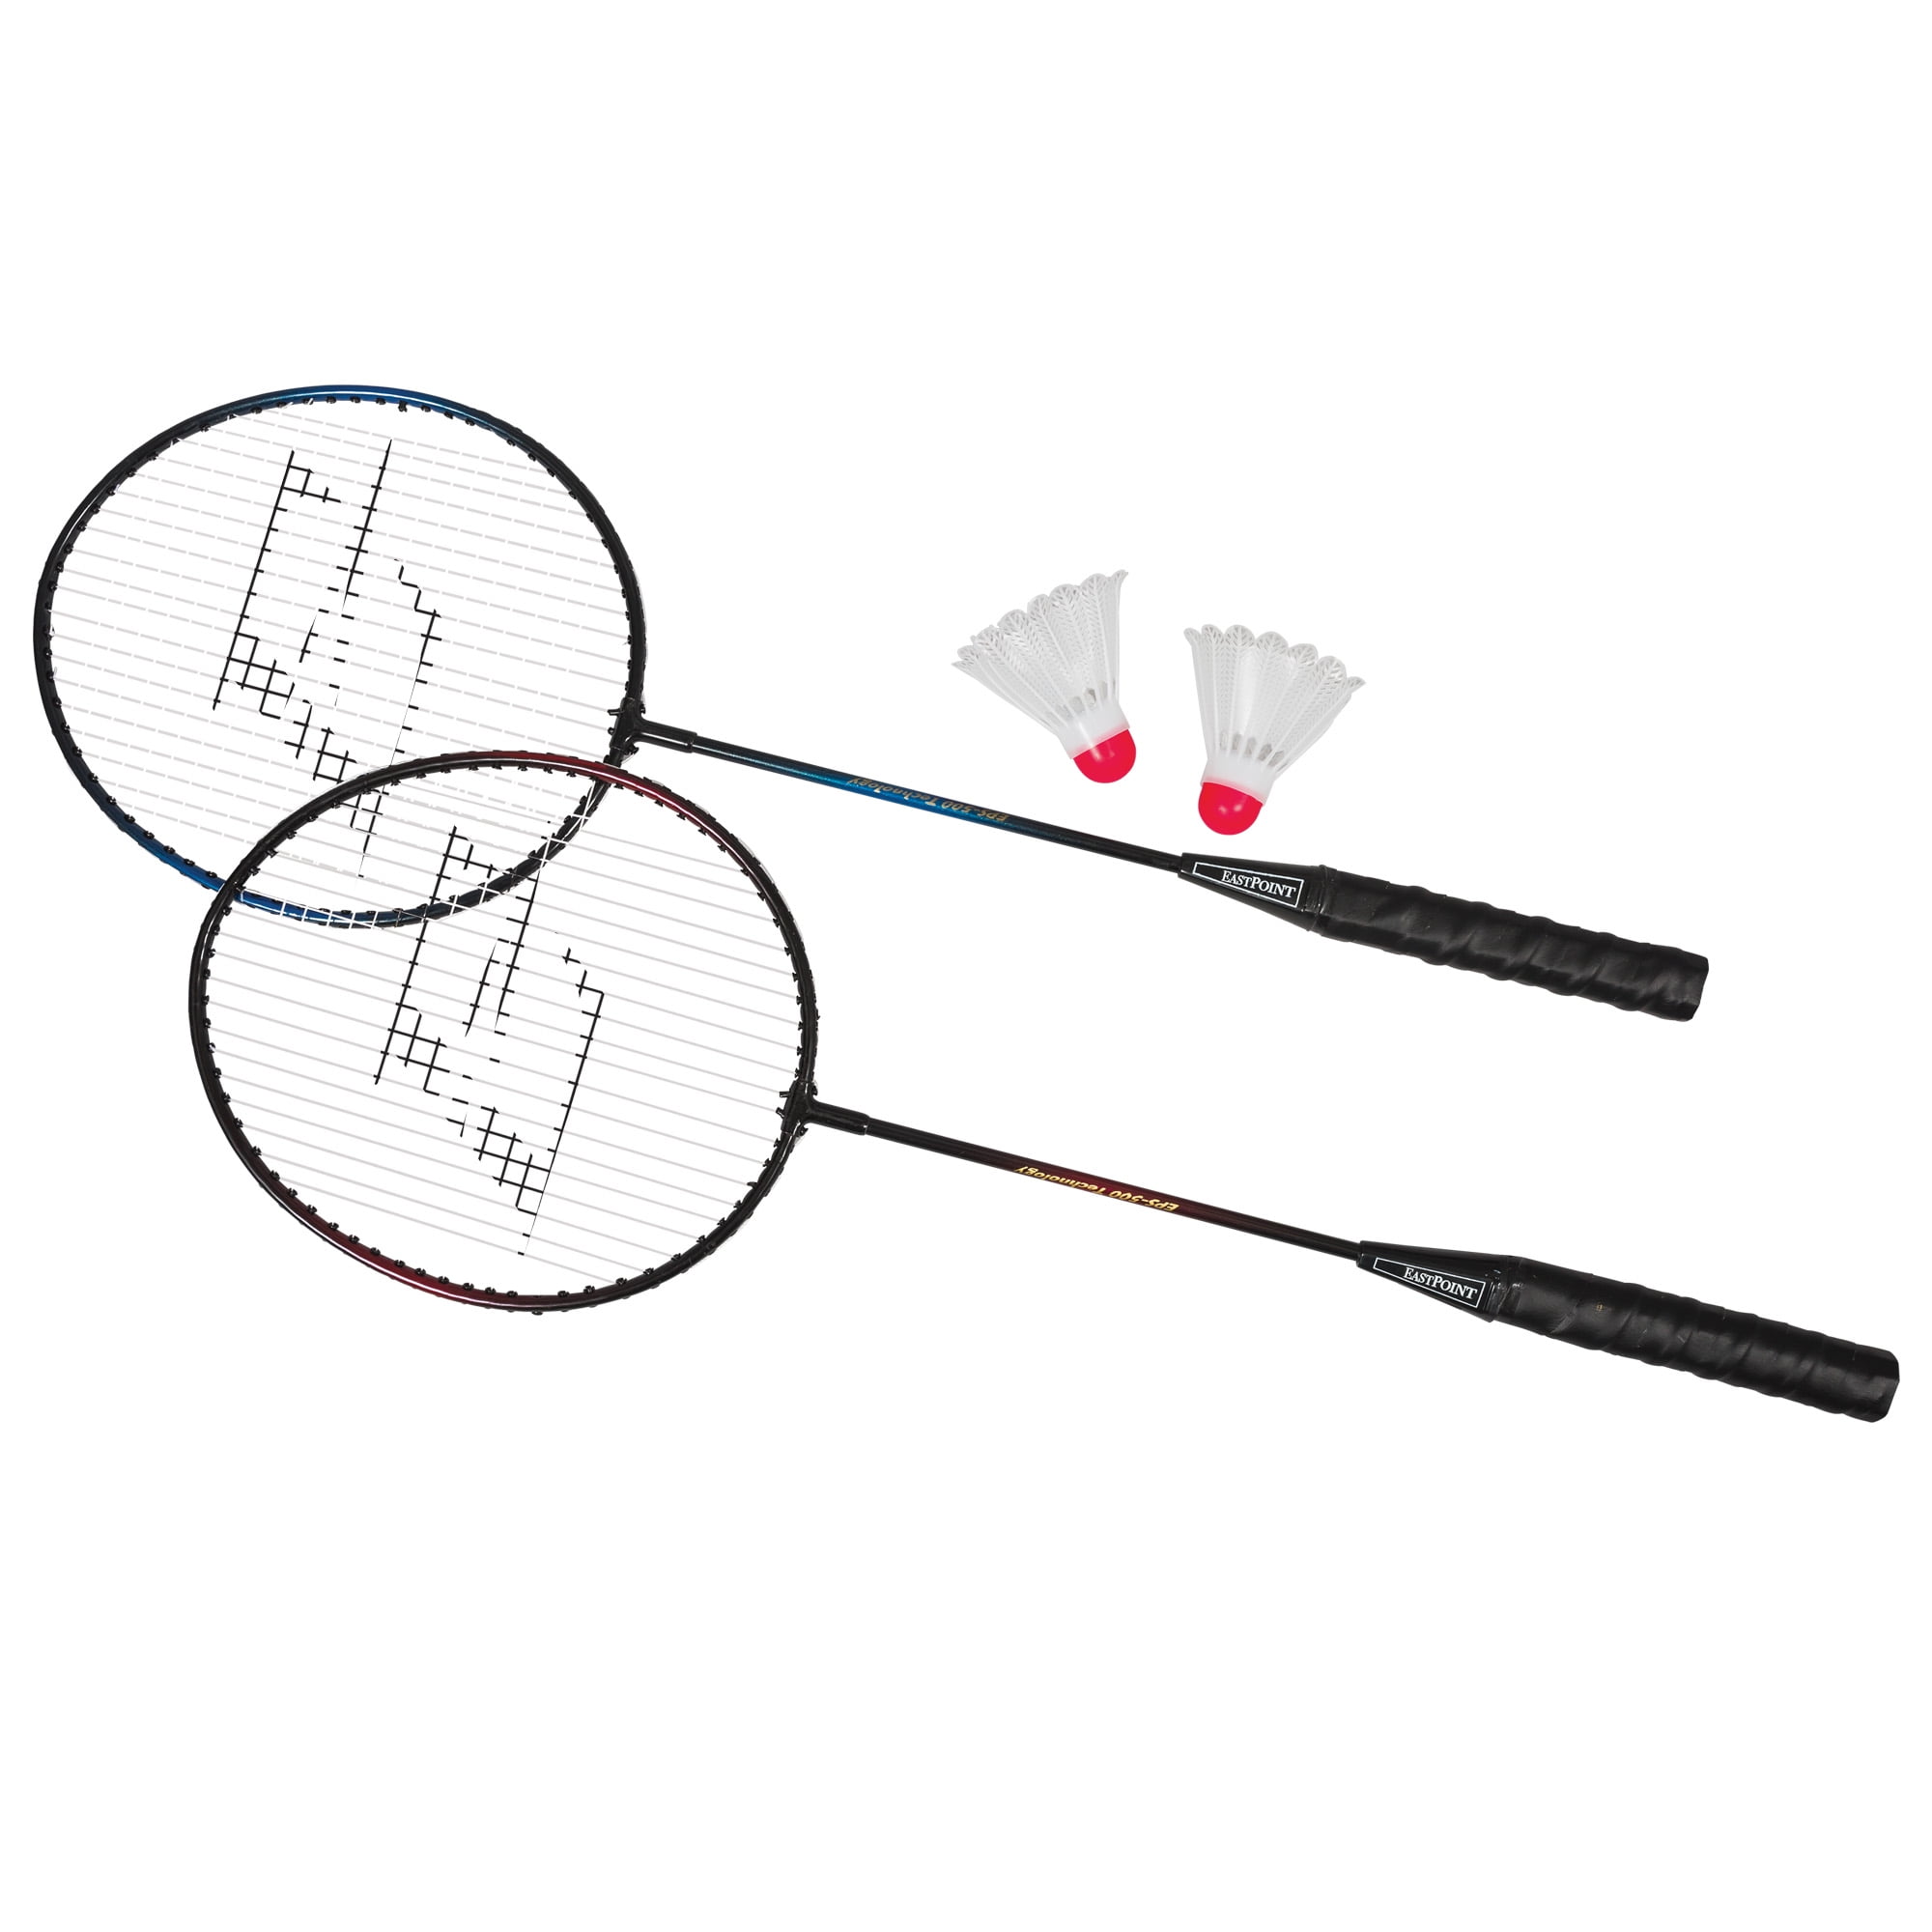 EastPoint Sports 2-Player Badminton Racket Set for Outdoor Play LOC TUB L 2 